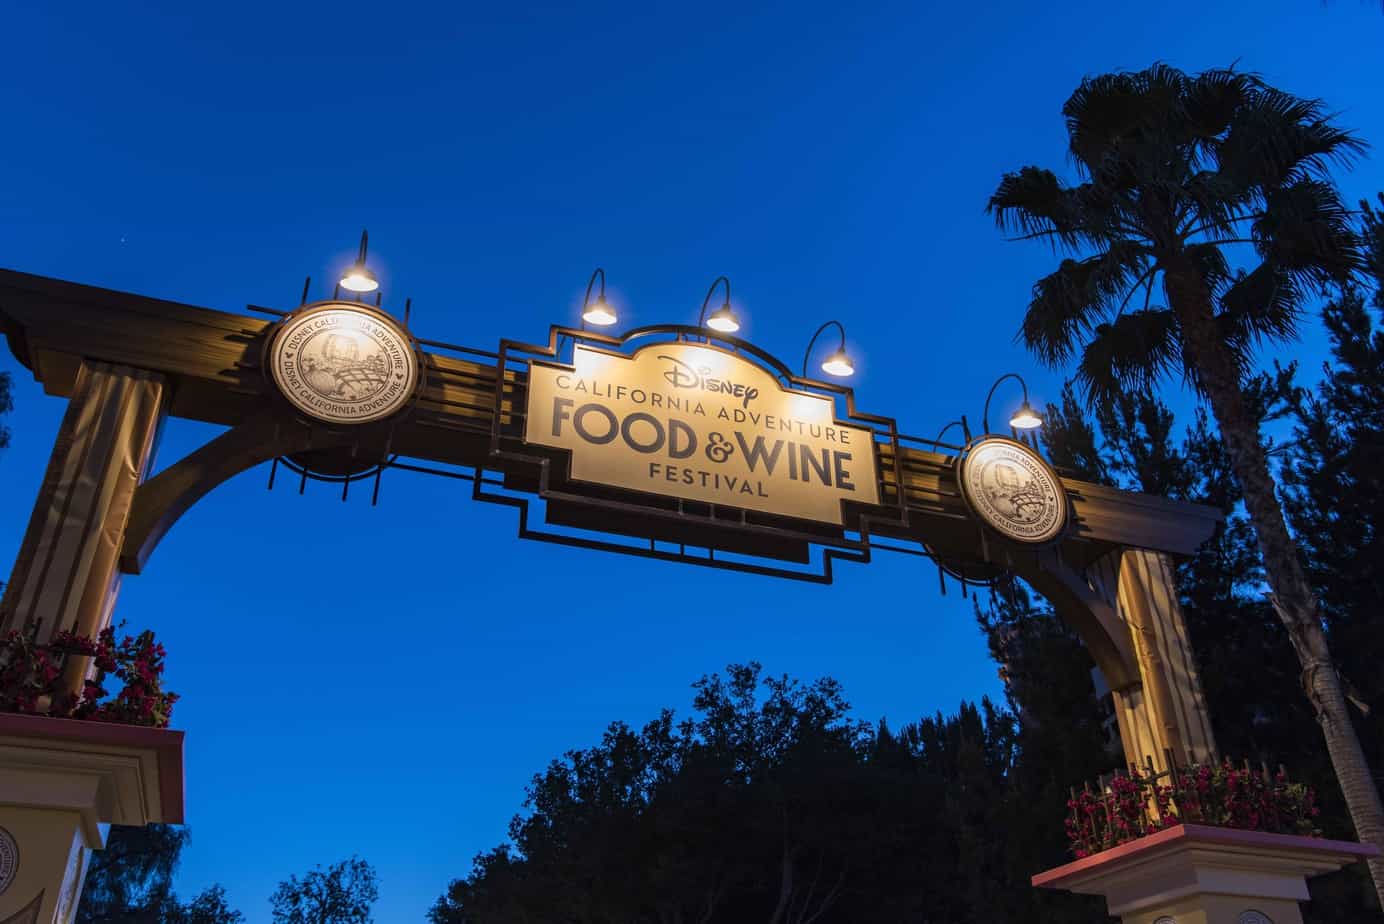 2018 Disneyland Food and Wine Festival Dates Announced! If there's one thing Disneyland does right: it's food and drinks! Just announced: the 2018 Disneyland Food and Wine Festival dates.